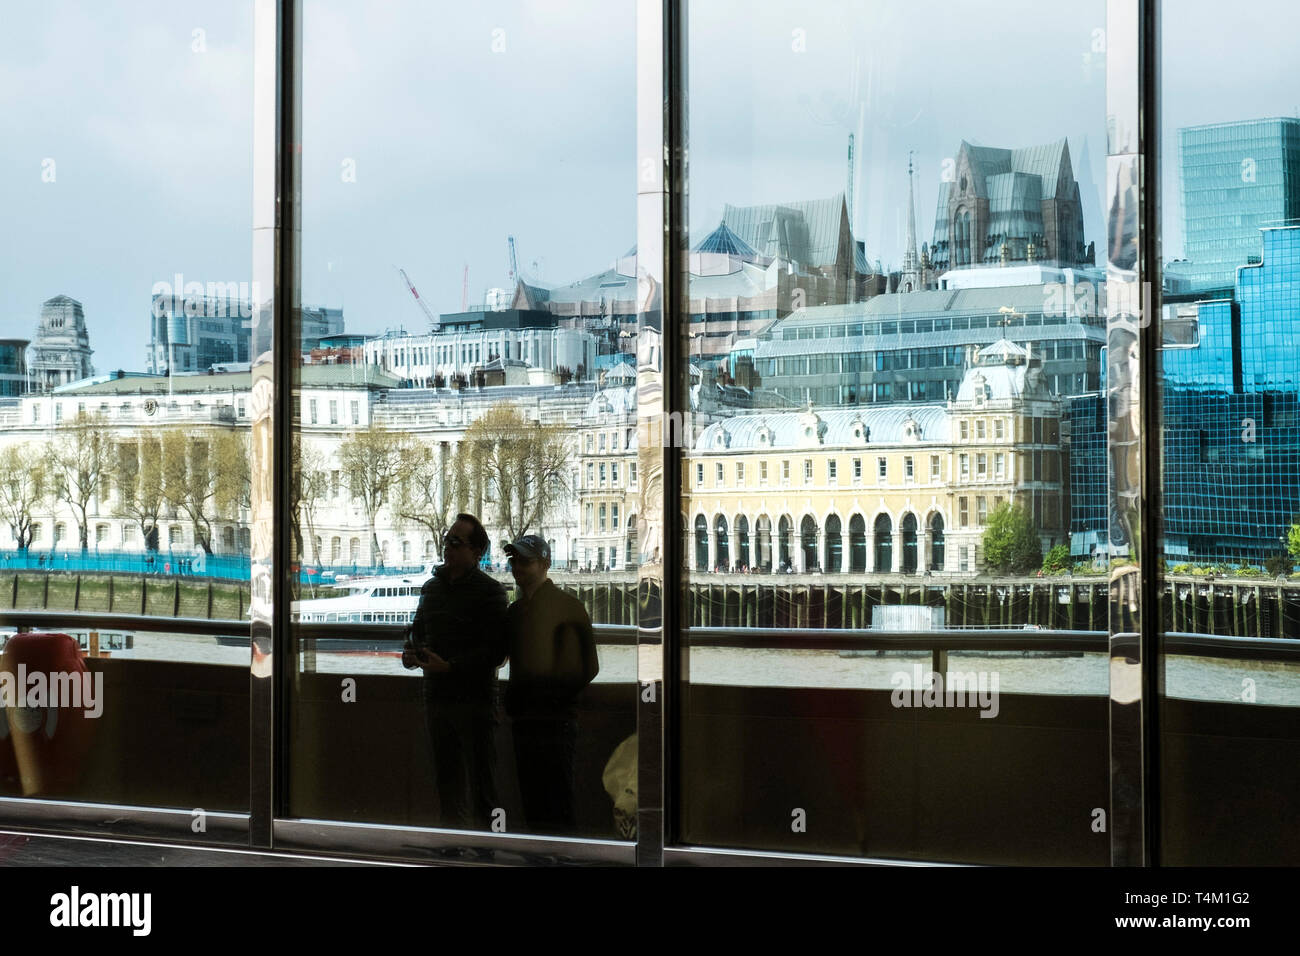 The distorted reflections of buildings on the Embankment seen in large glass windows in a building on the South Bank in London. Stock Photo